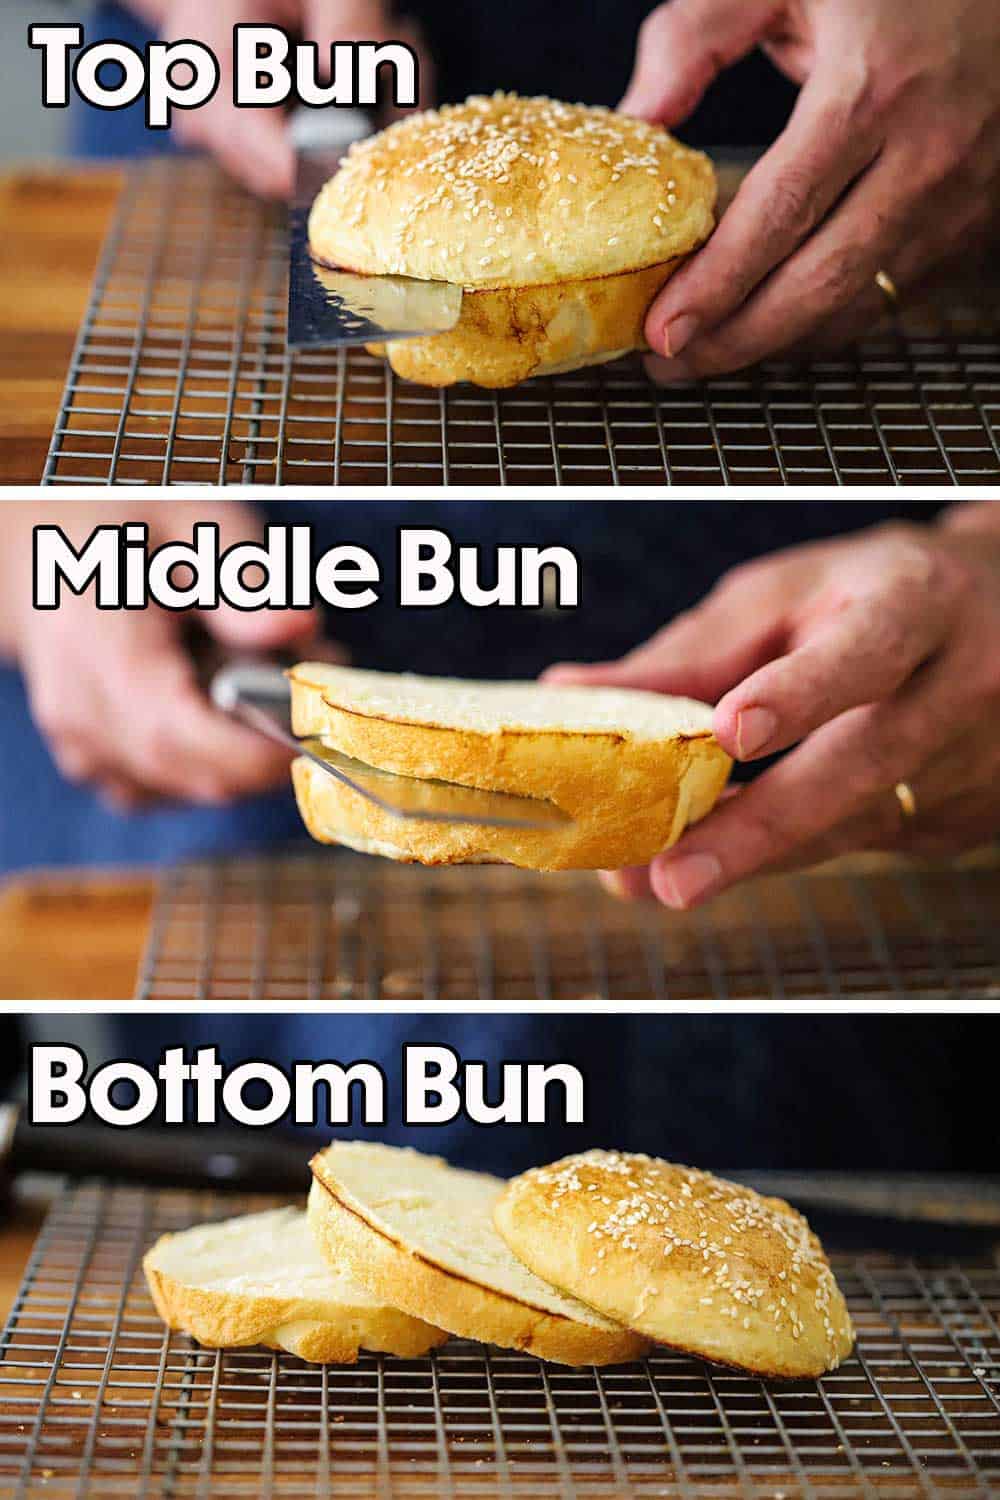 A person slicing the top of a sesame bun off and then that same person cutting the bun in half and the 3 layers of the sliced bun on a baking rack.